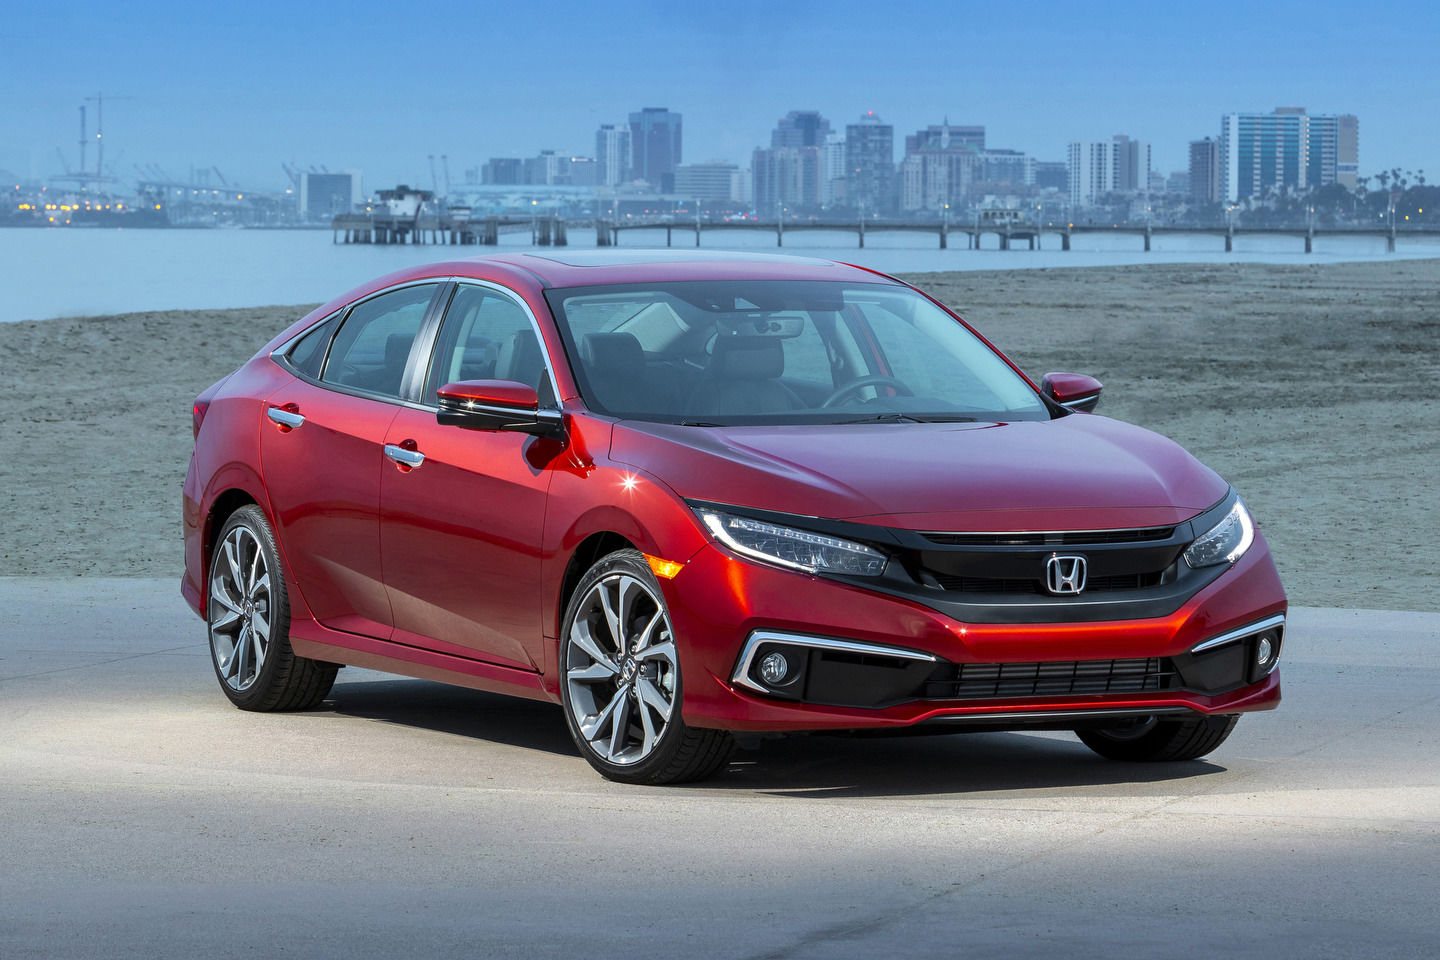 Honda is the brand with the Best Retained Value according to Canadian Black Book